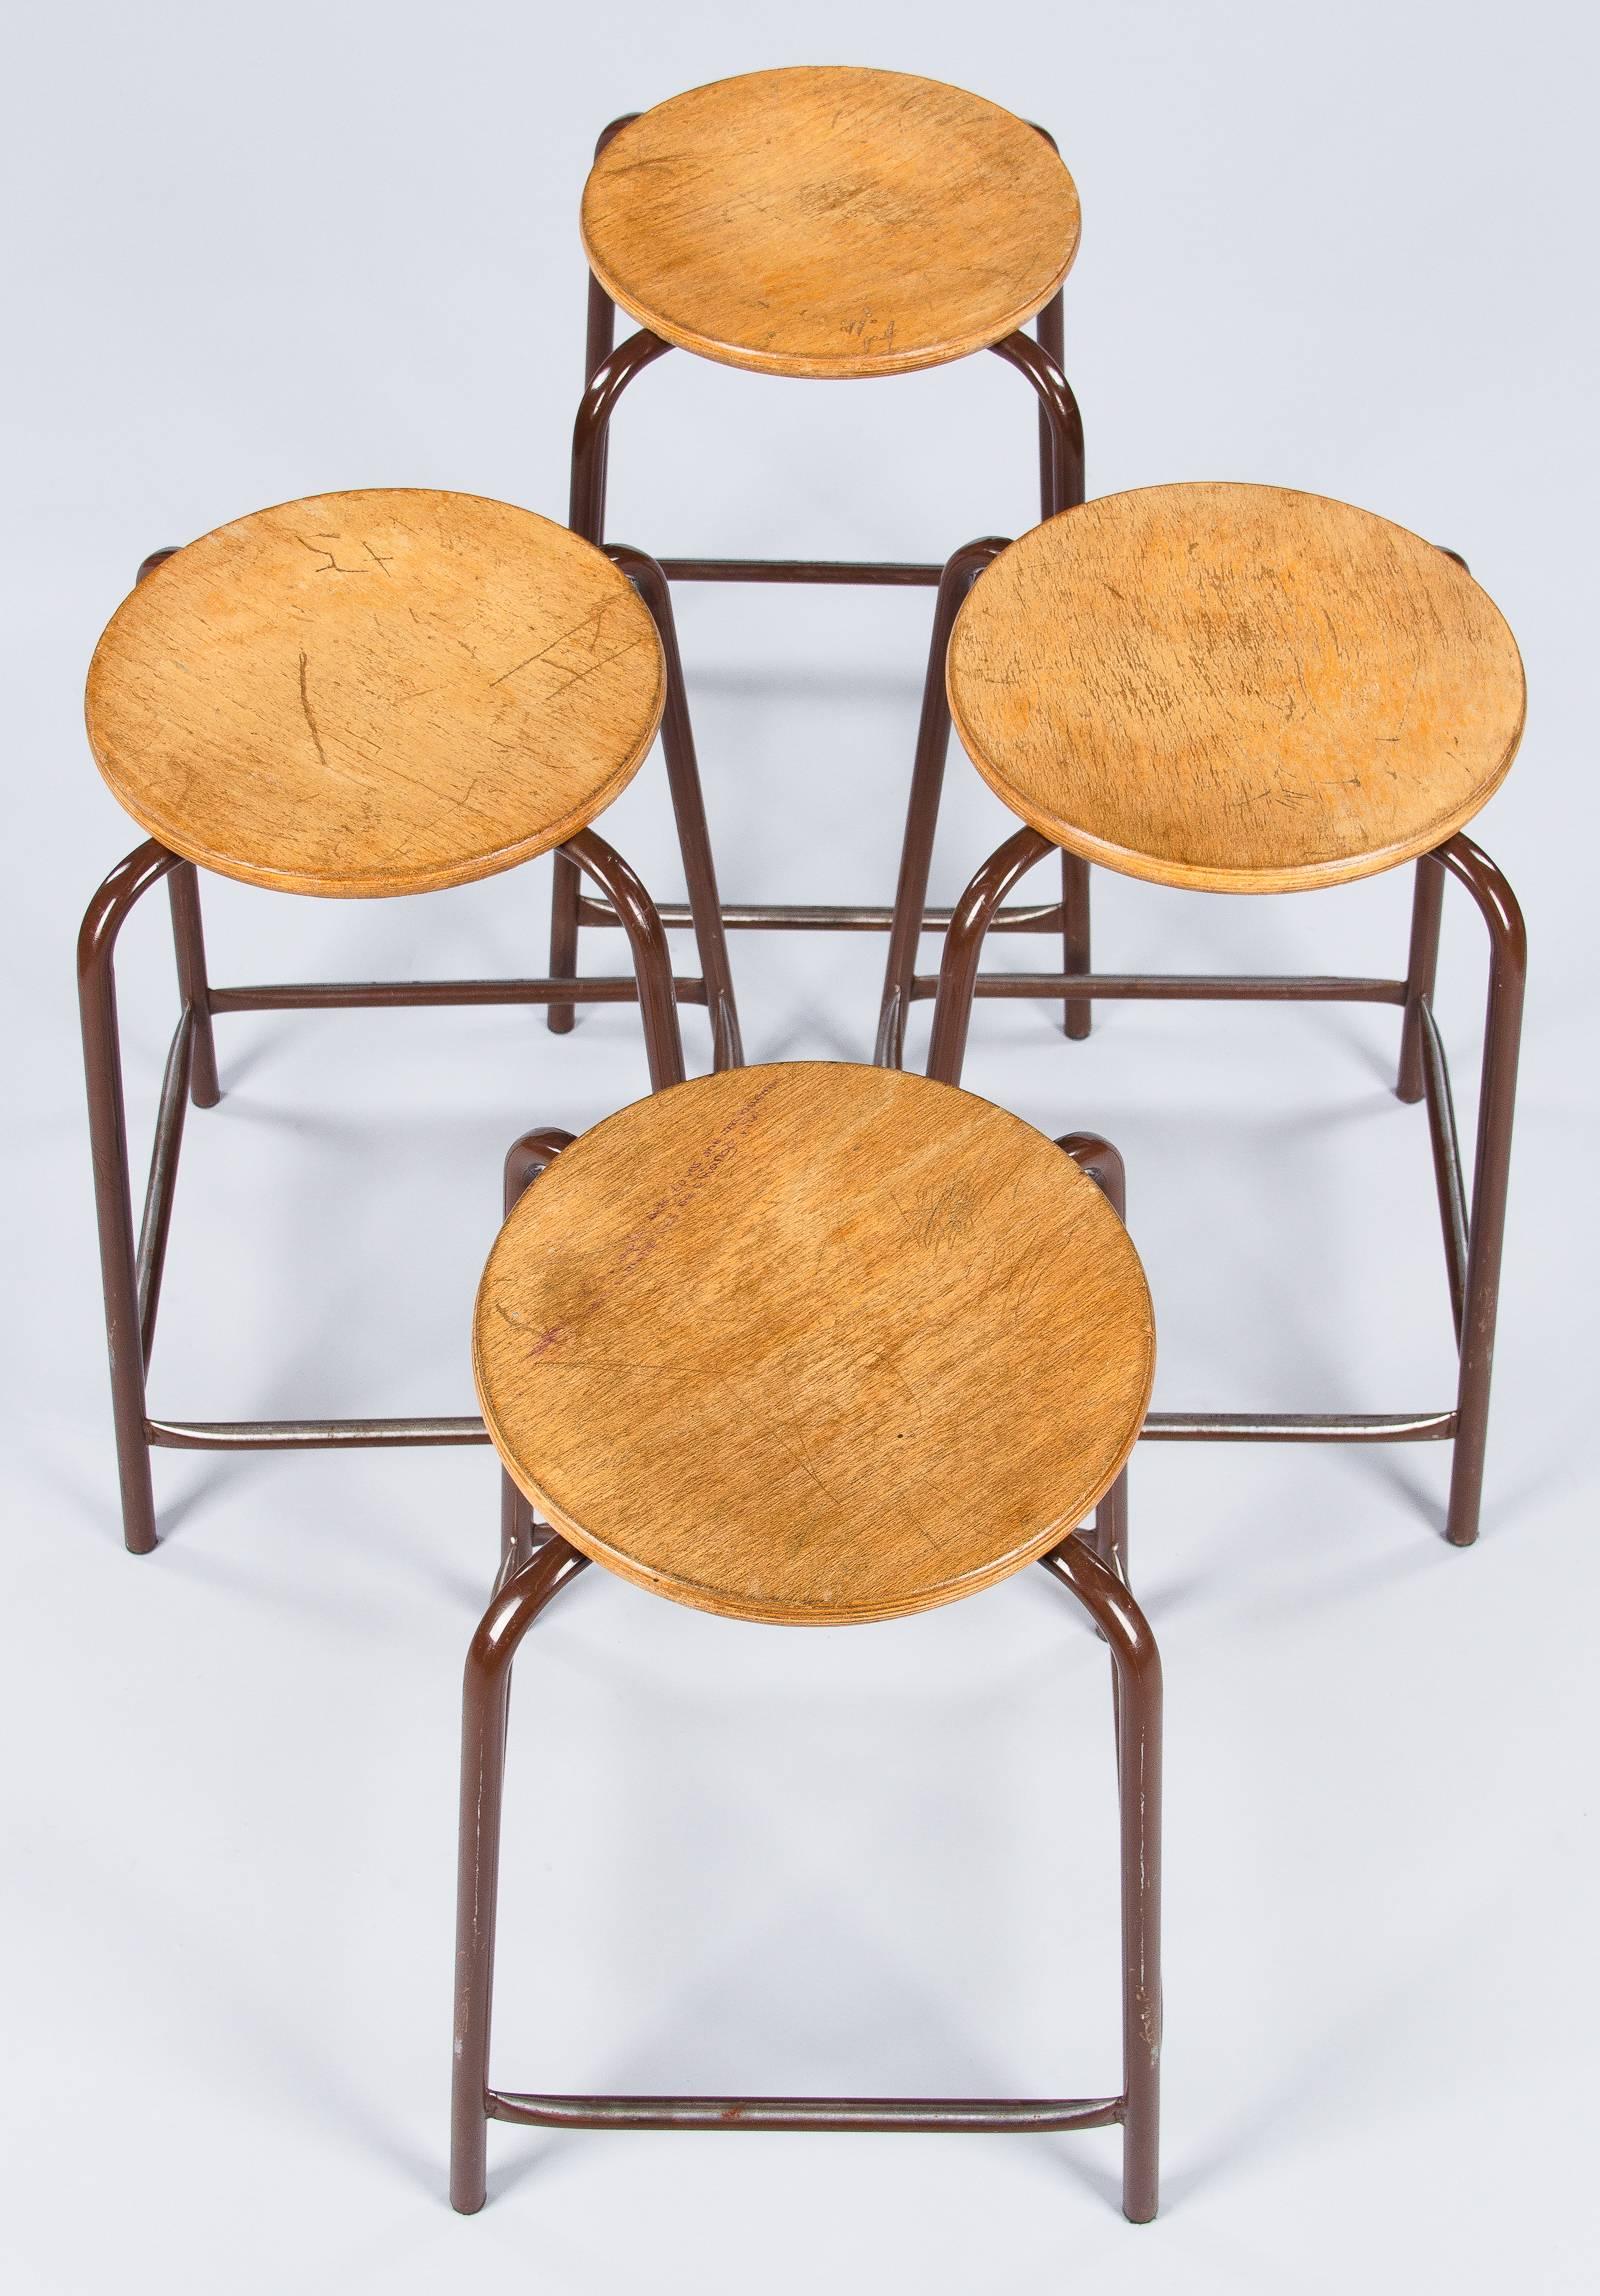 Mid-20th Century Set of Four French Vintage Wood and Metal Industrial Stools, 1950s